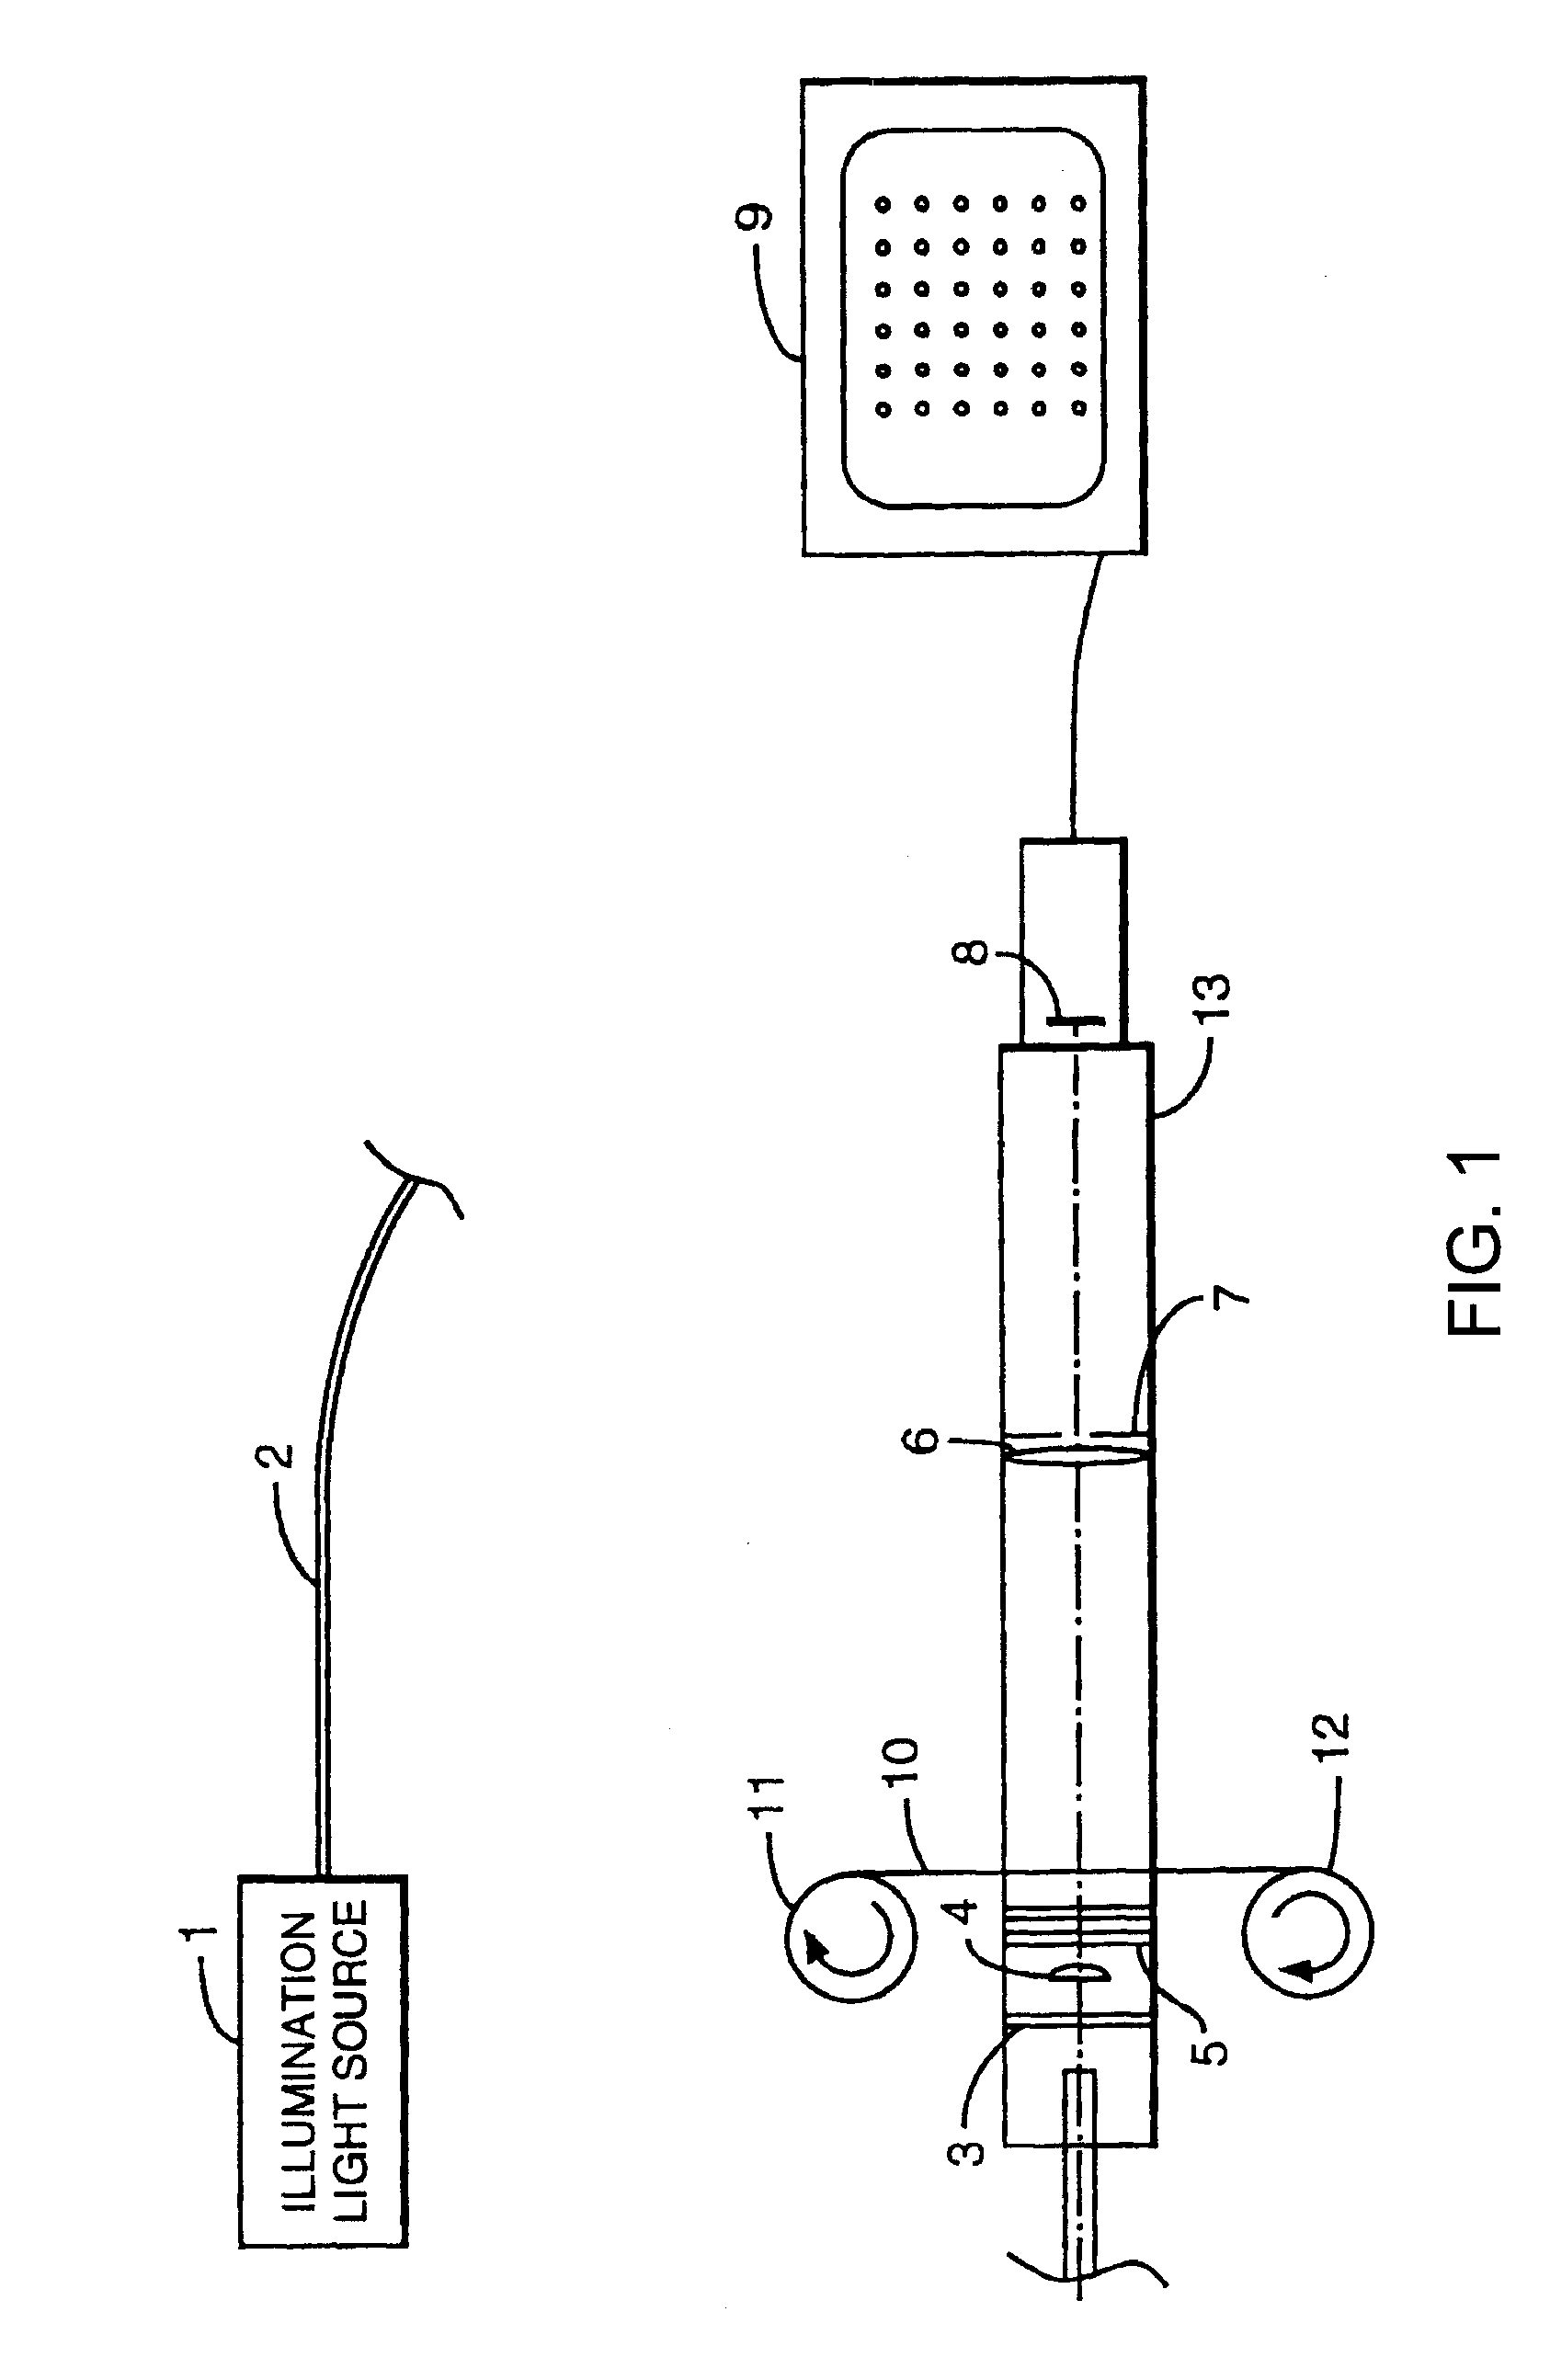 Method and device for non-destructive analysis of perforations in a material